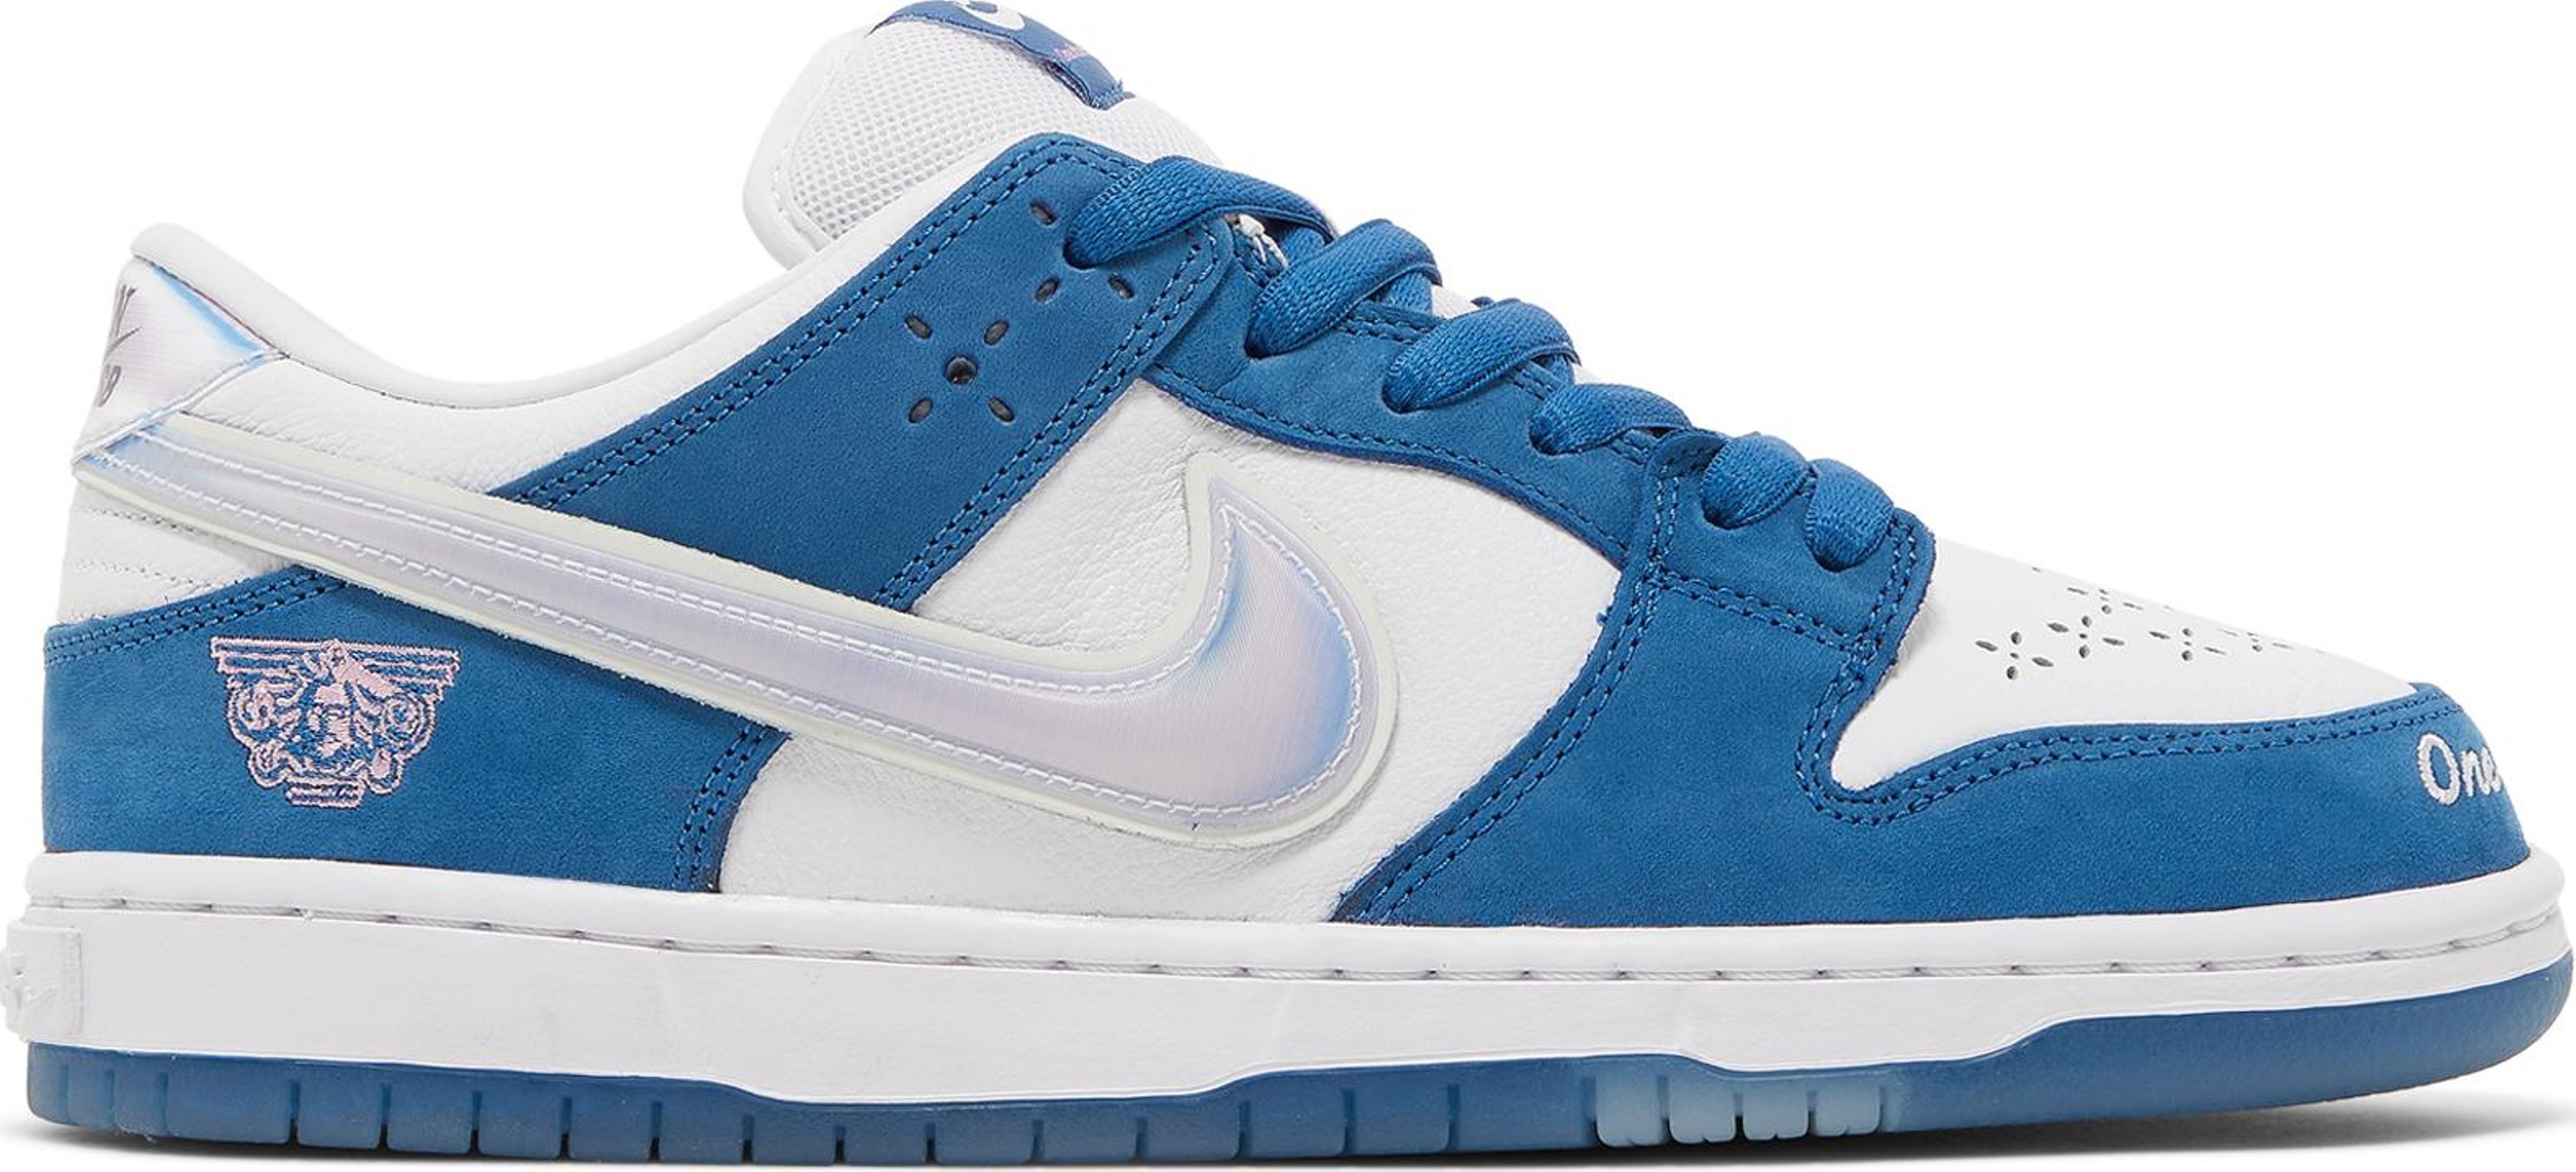 Buy Born x Raised x Dunk Low SB 'One Block at a Time' - FN7819 400 ...